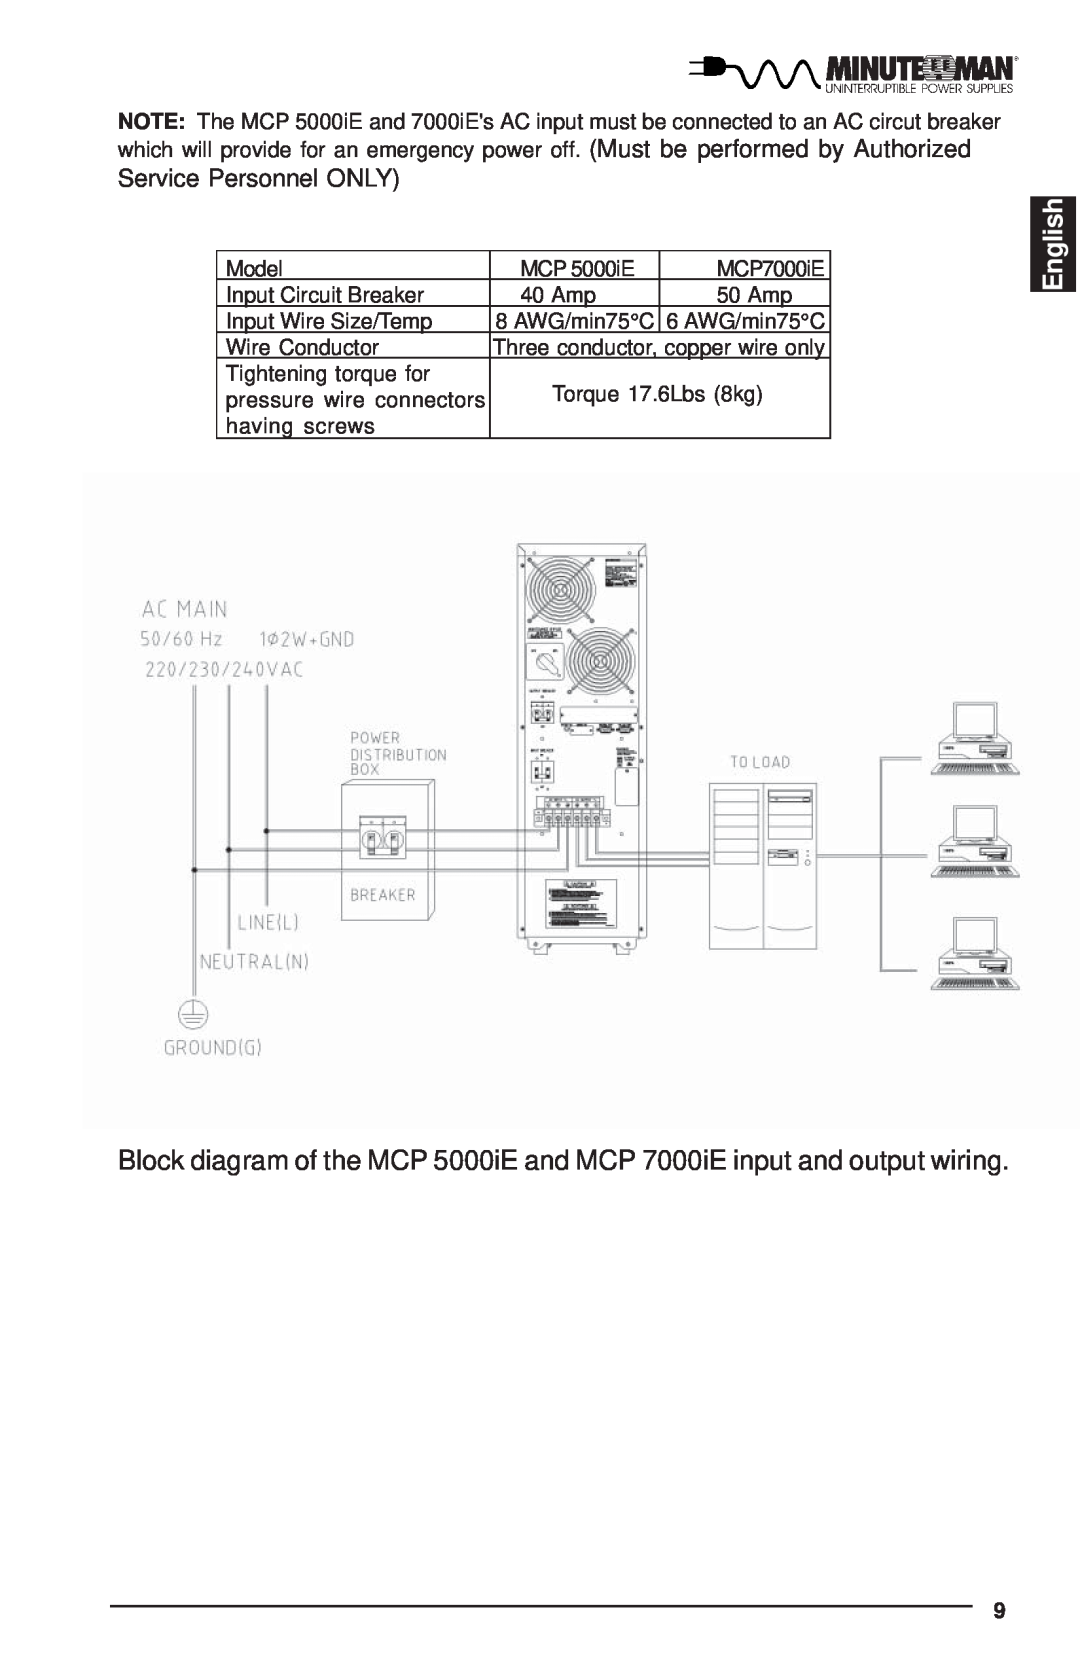 Minuteman UPS MCP-E user manual English, Service Personnel ONLY 